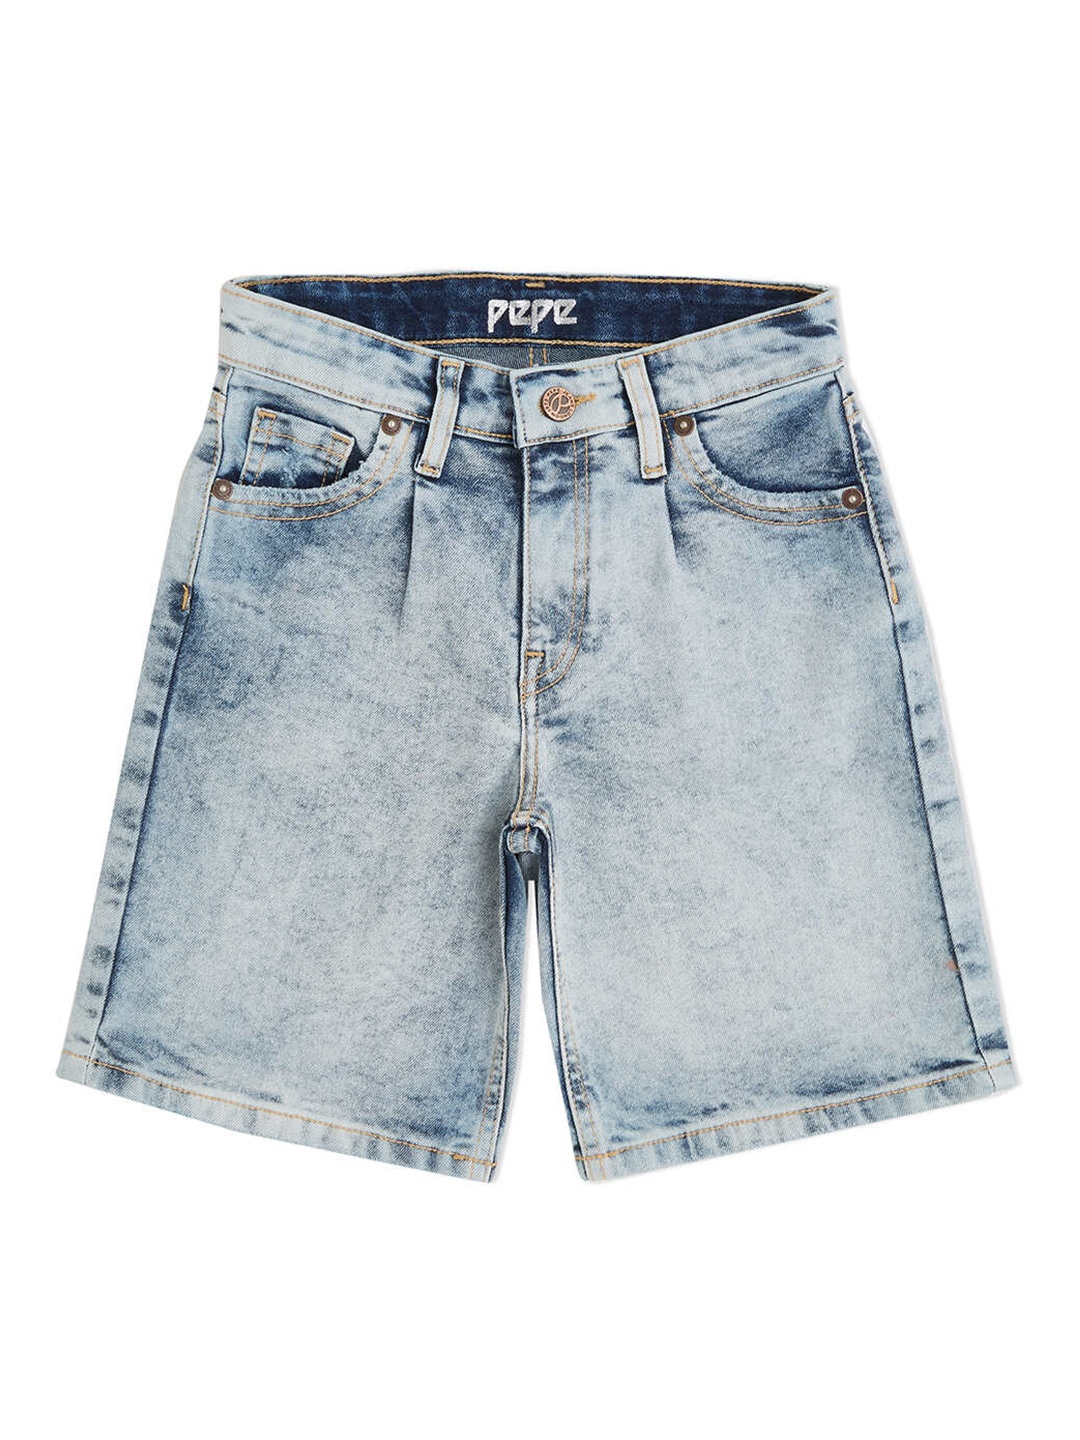 

Pepe Jeans Girls Washed Loose Fit High-Rise Cotton Denim Shorts, Blue